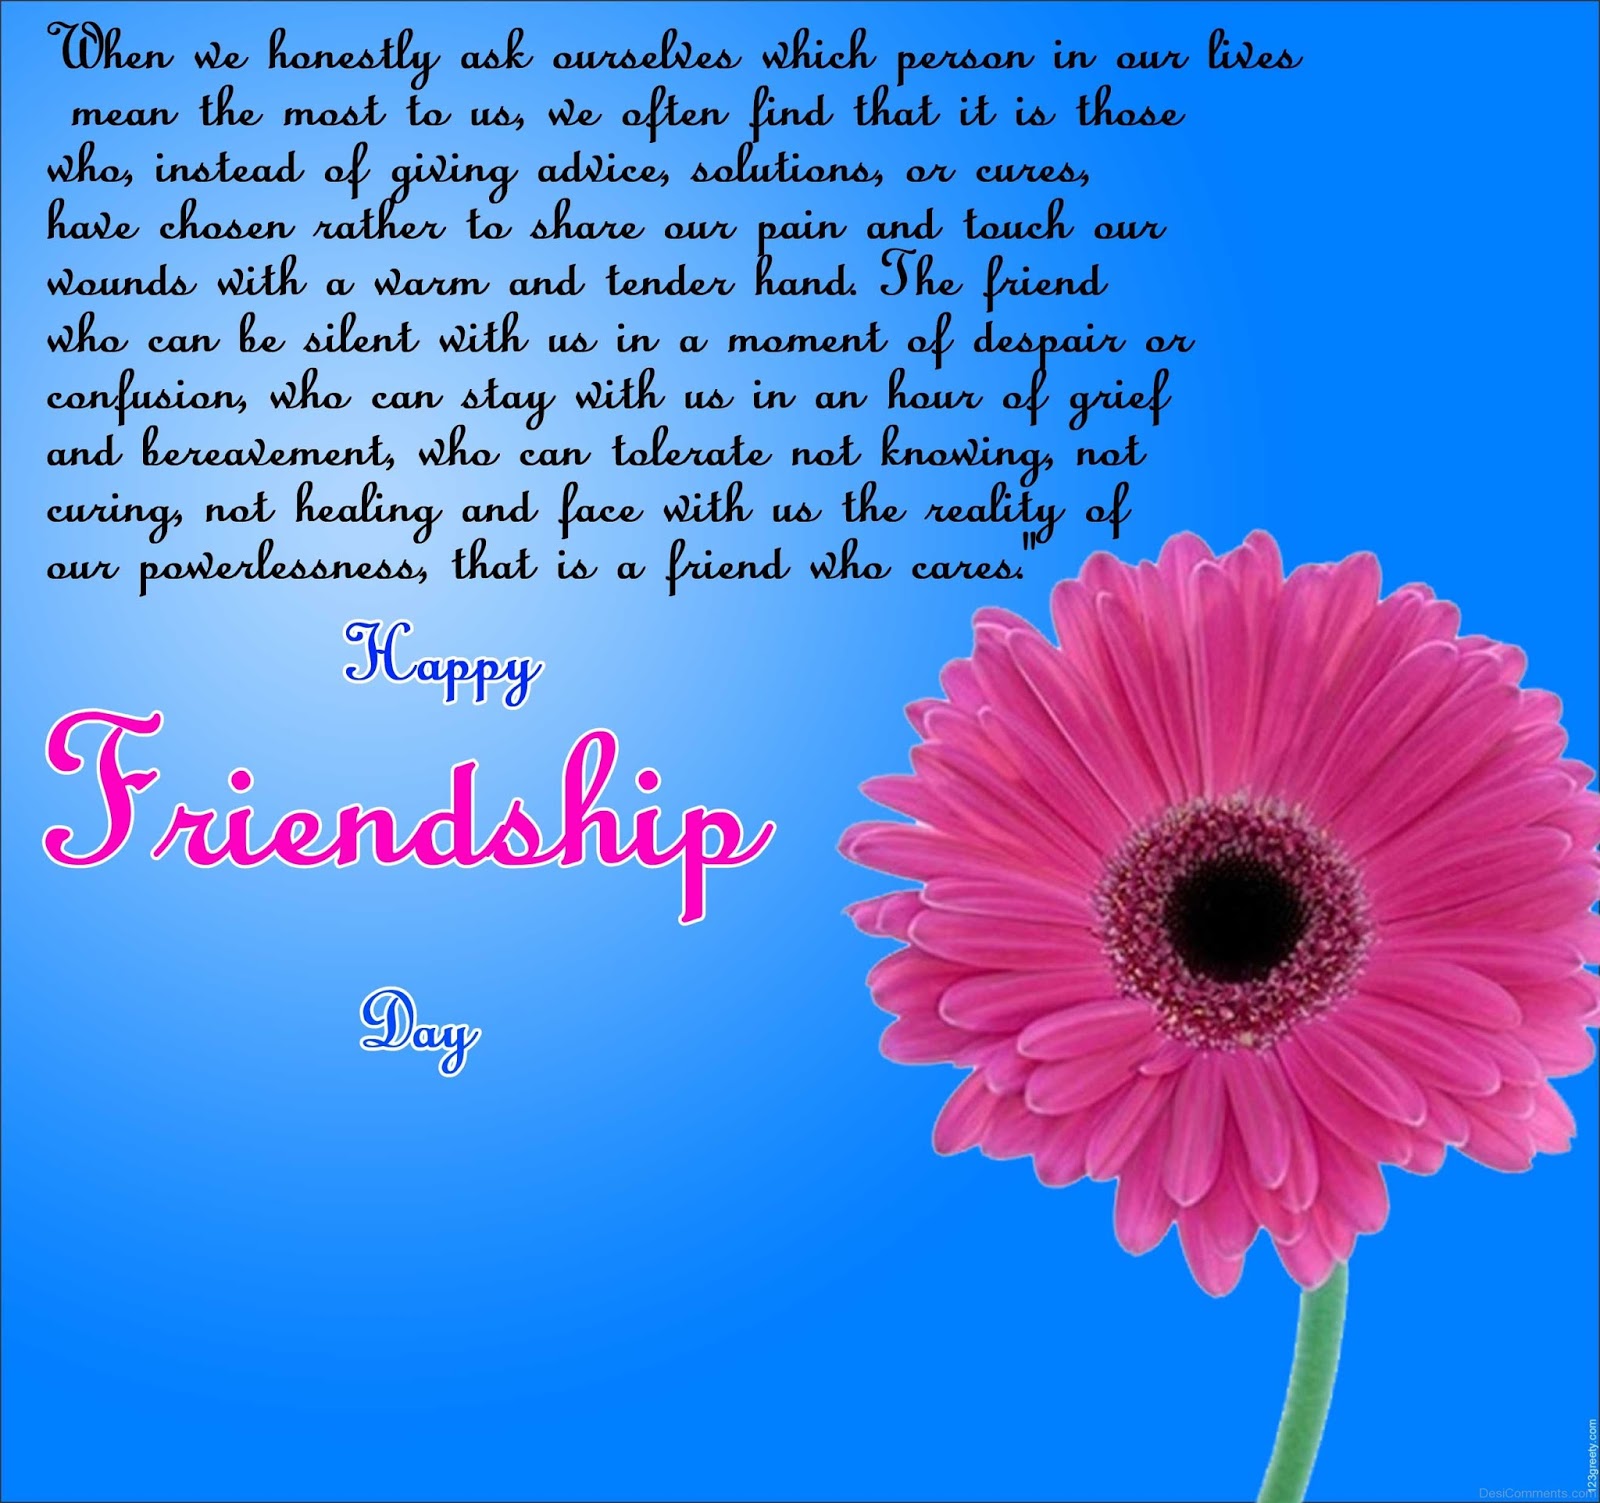 Friendship day 2015 images with quotes, sayings, poems for whatsapp and